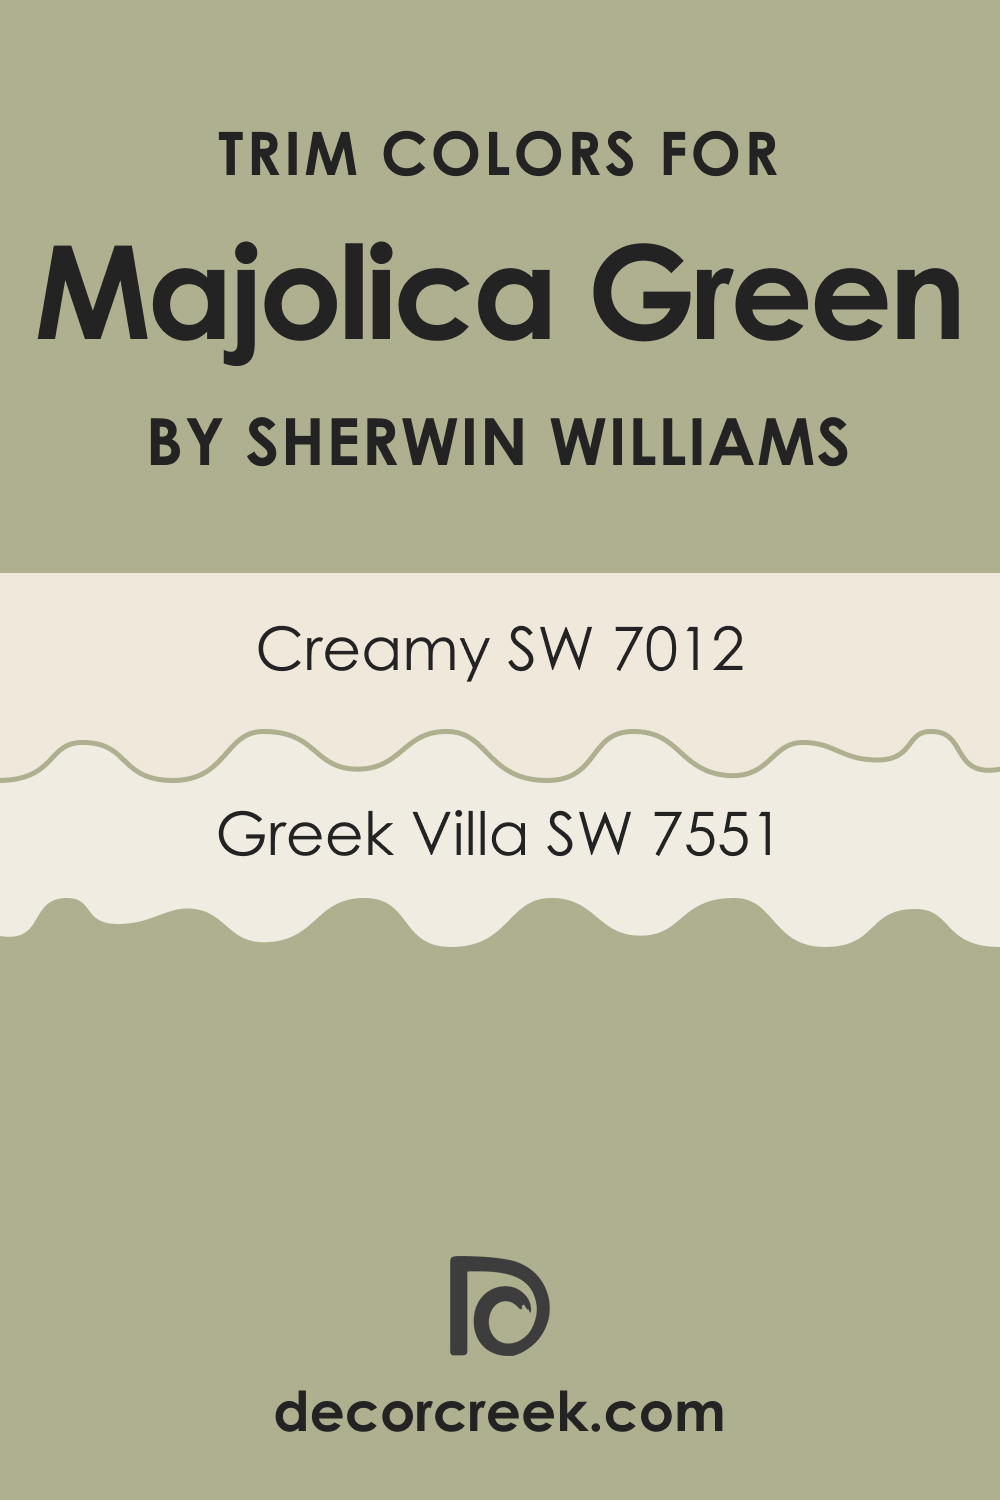 What Is the Best Trim Color For SW Majolica Green?